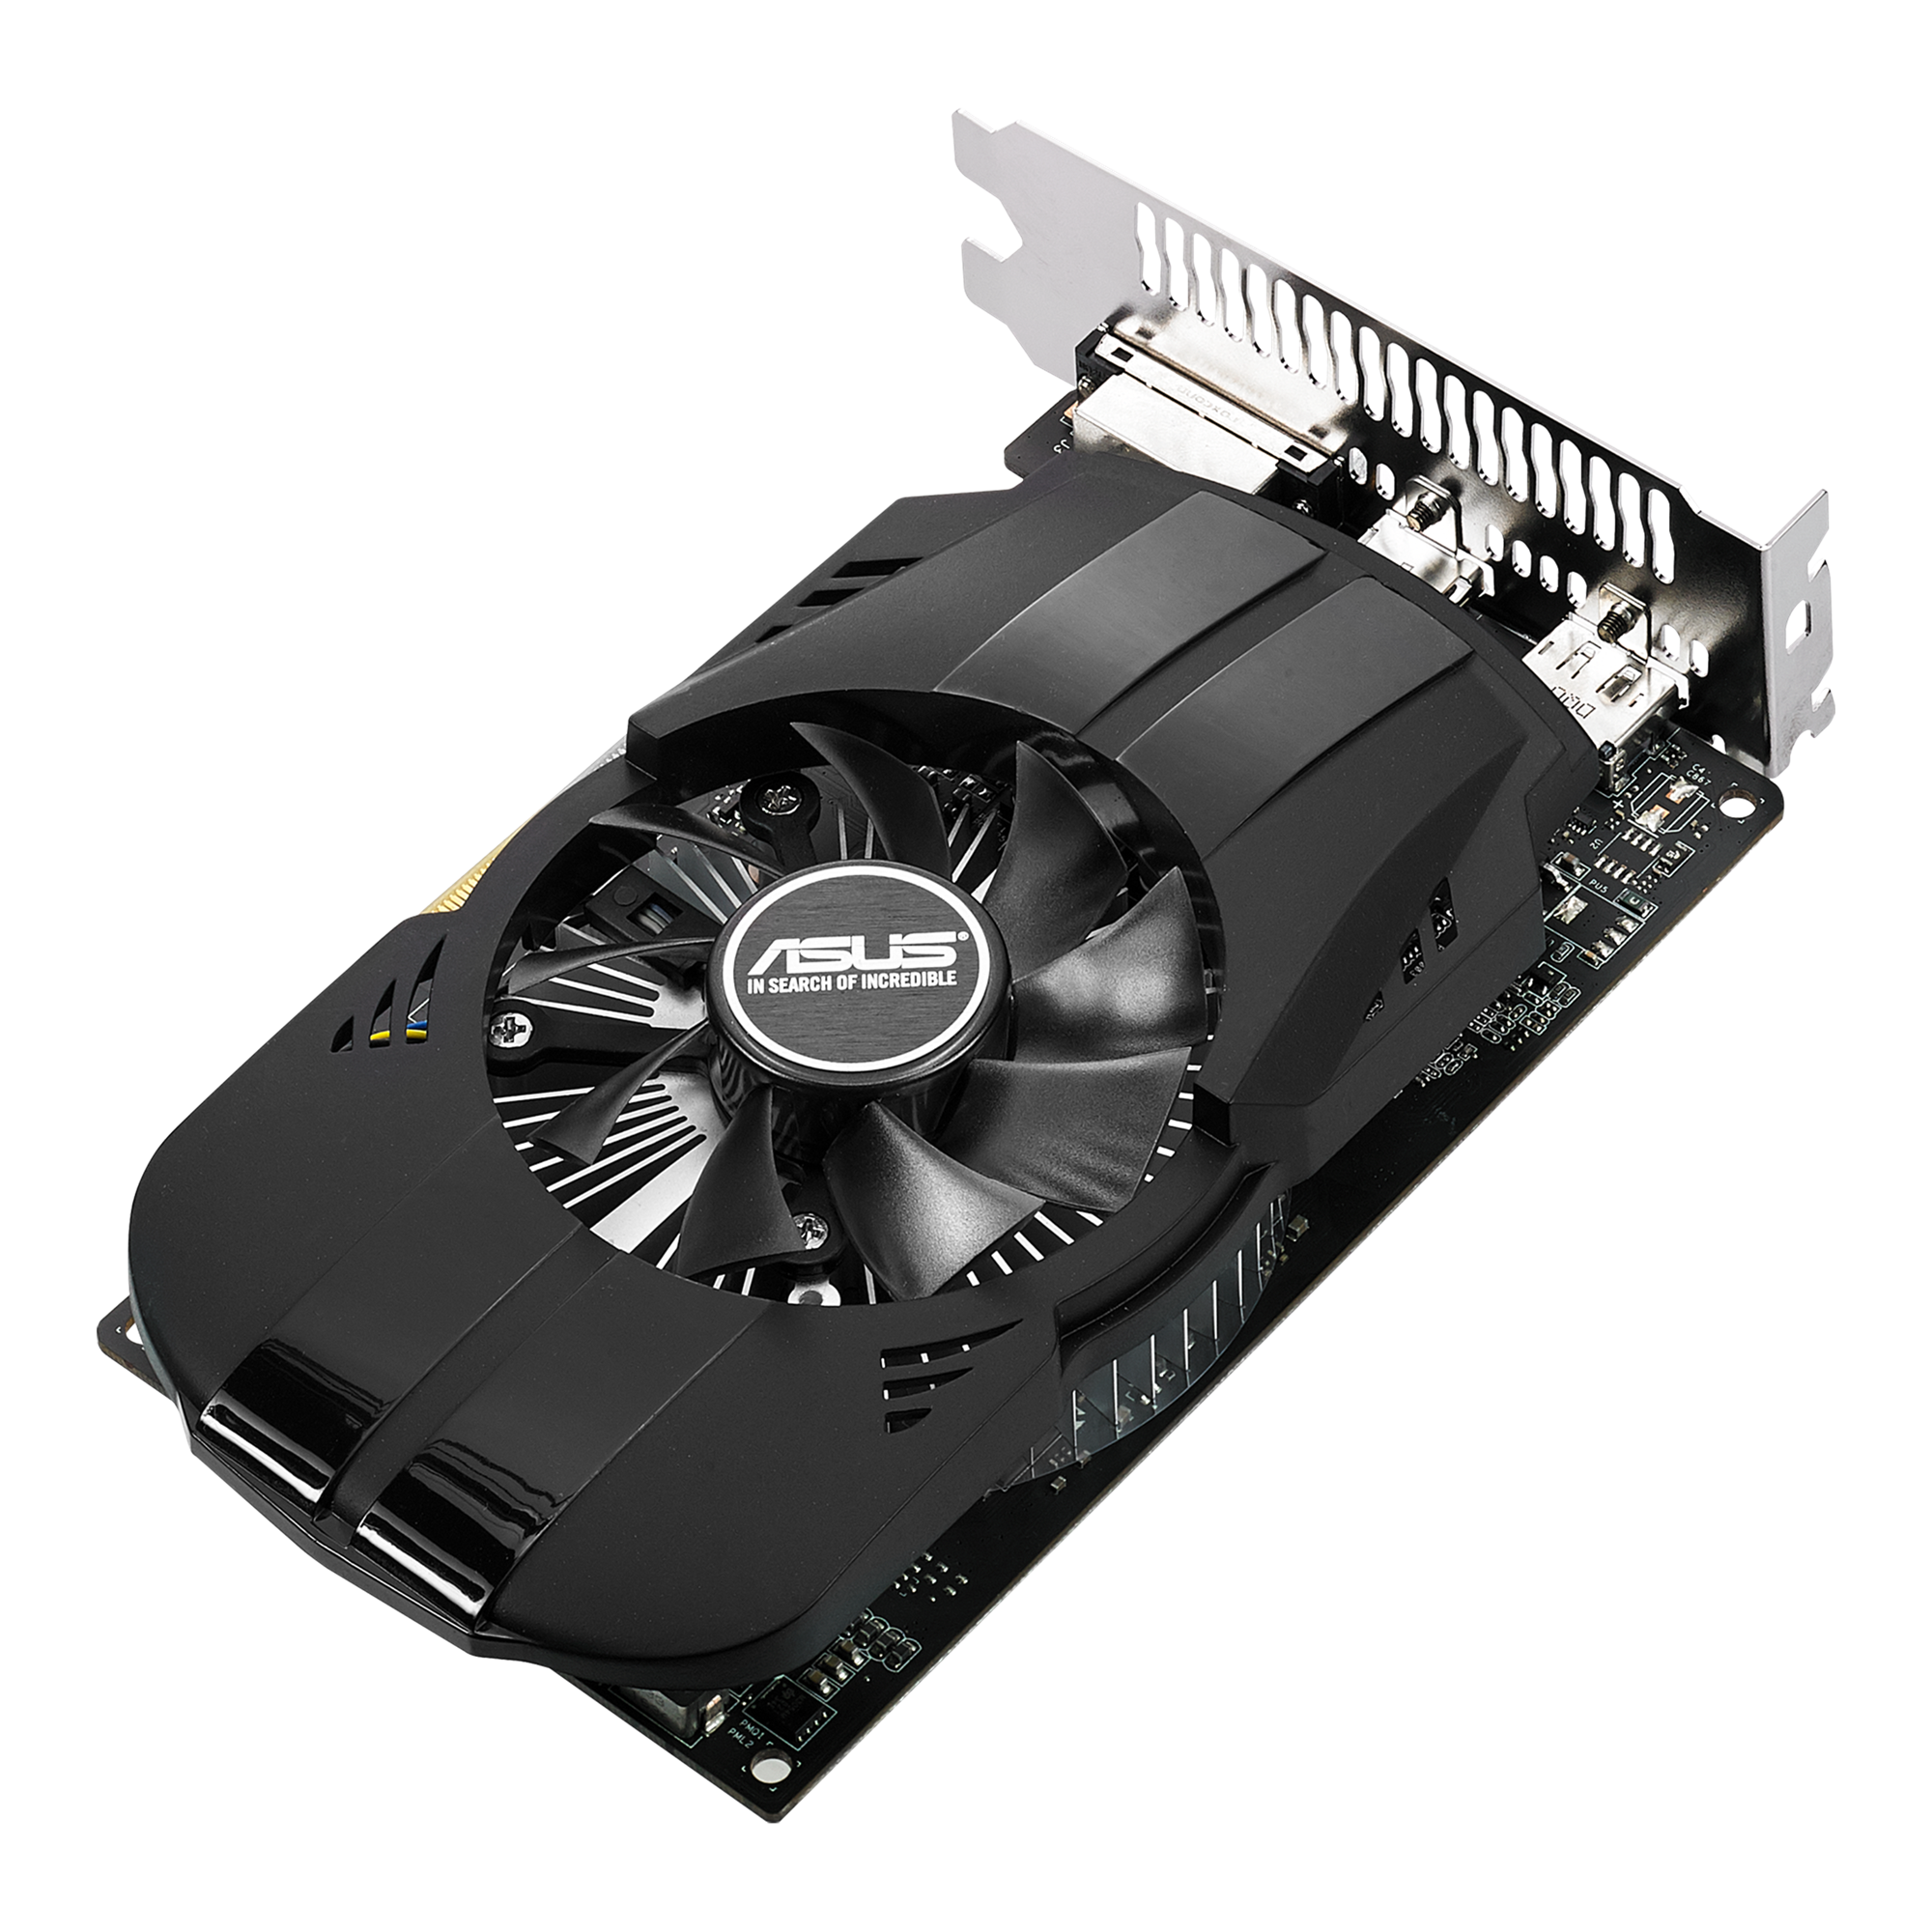 ASUS GEFORCE GTX 1050Ti 4GBPC/タブレット